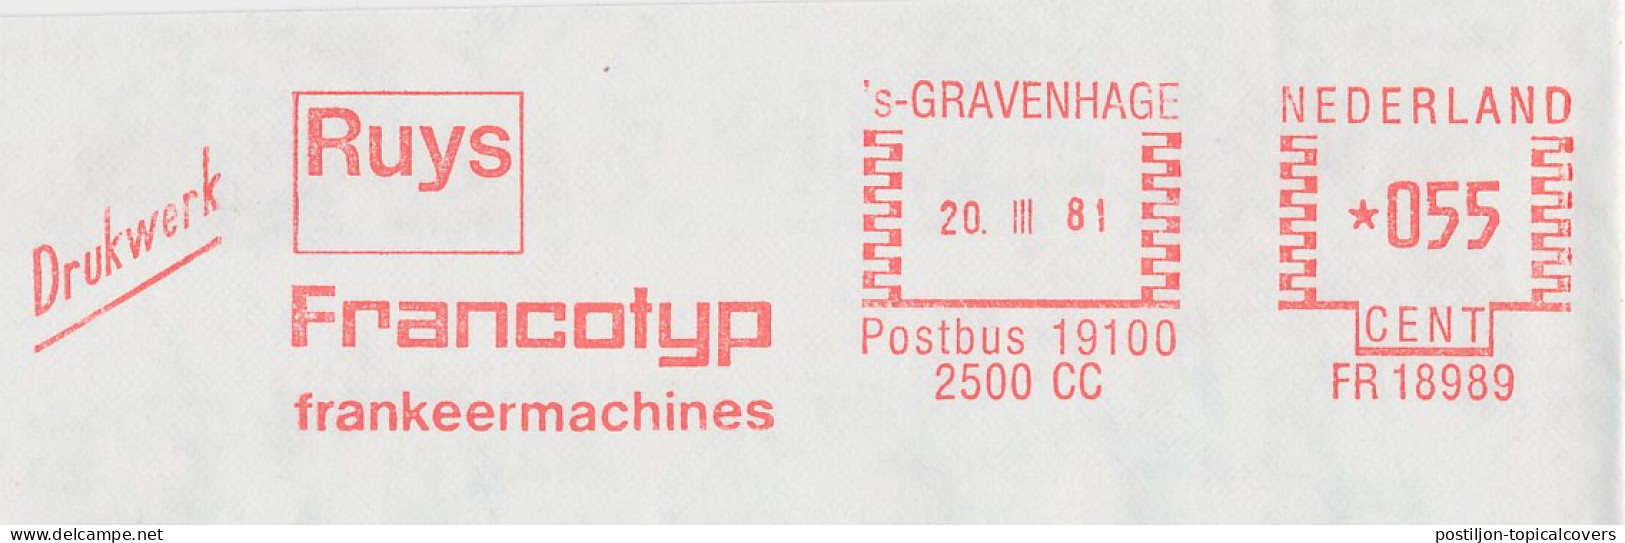 Meter Cover Netherlands 1981 Francotyp - The Hague - Automatenmarken [ATM]